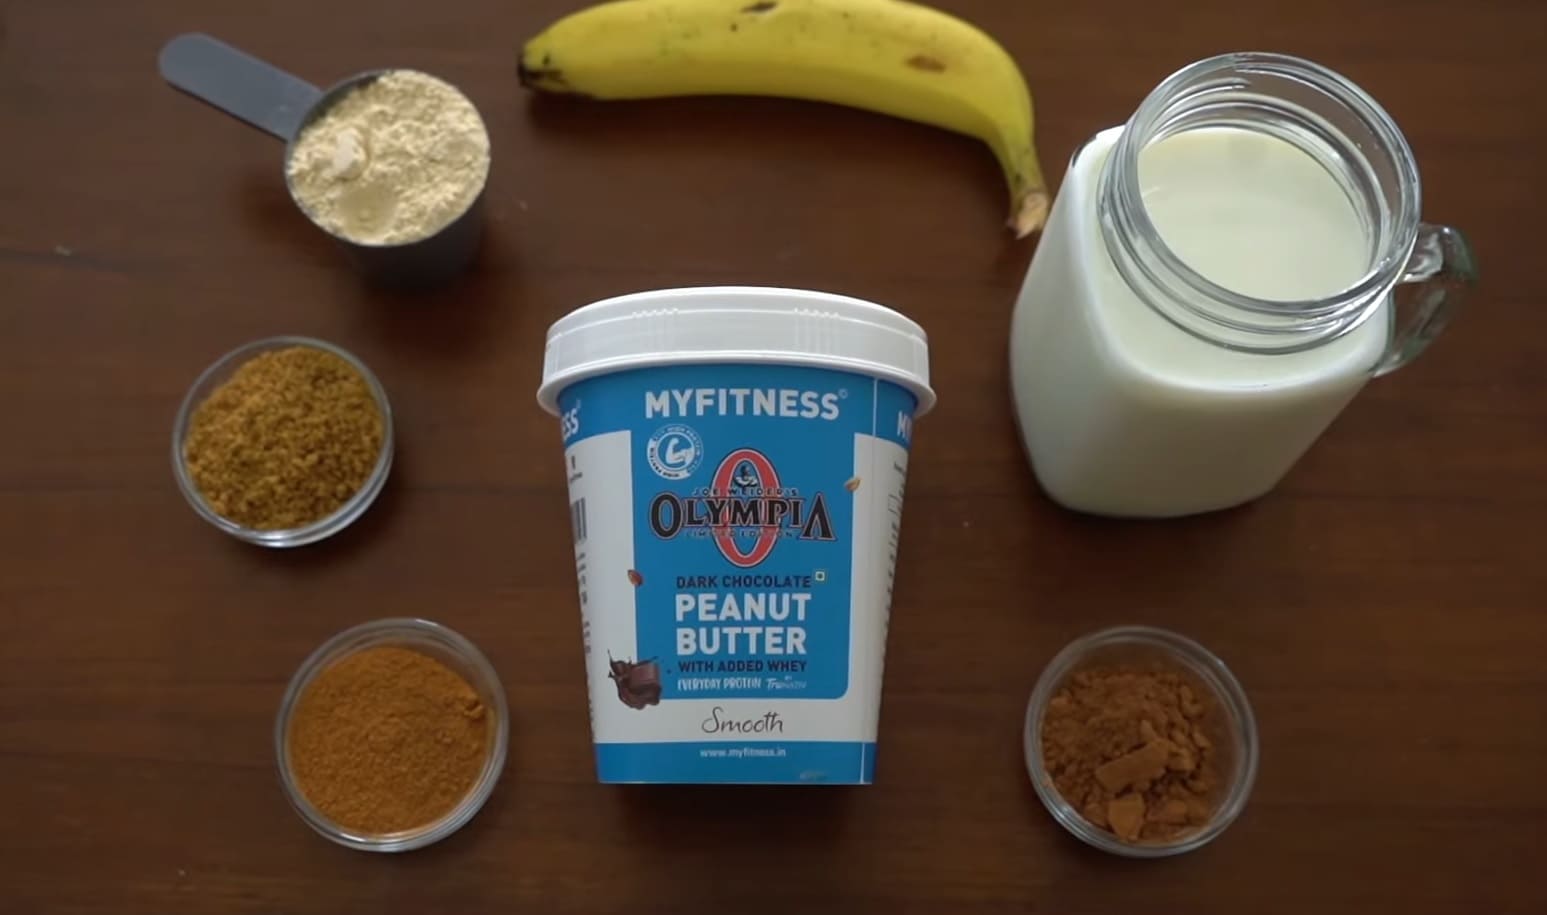 How to Mix Protein Powder Without Shaker?